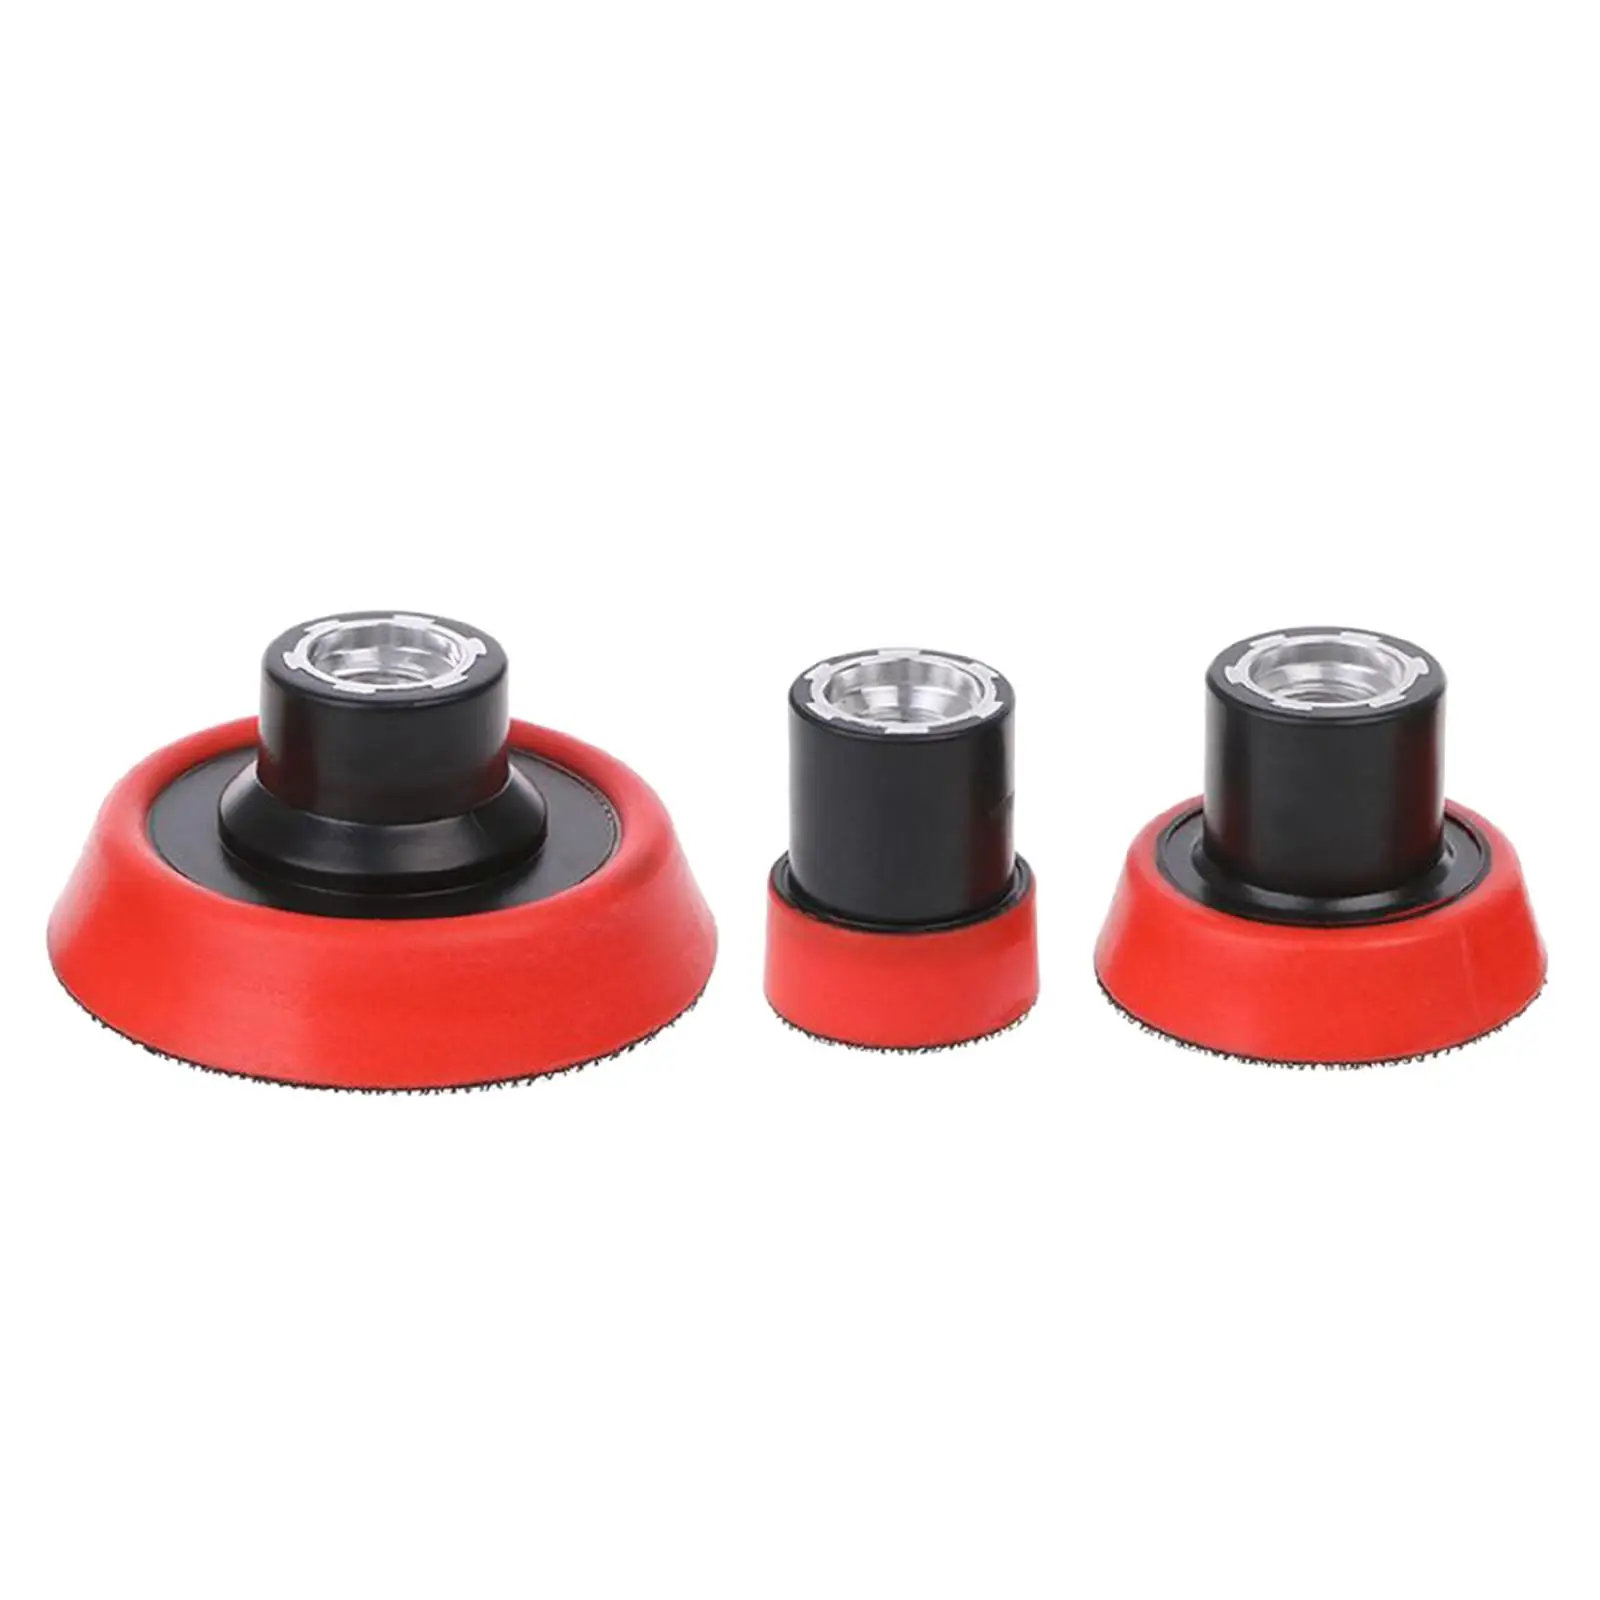 3x Backing   Accessories Durable Set Tools Buffering Backer Polisher M14